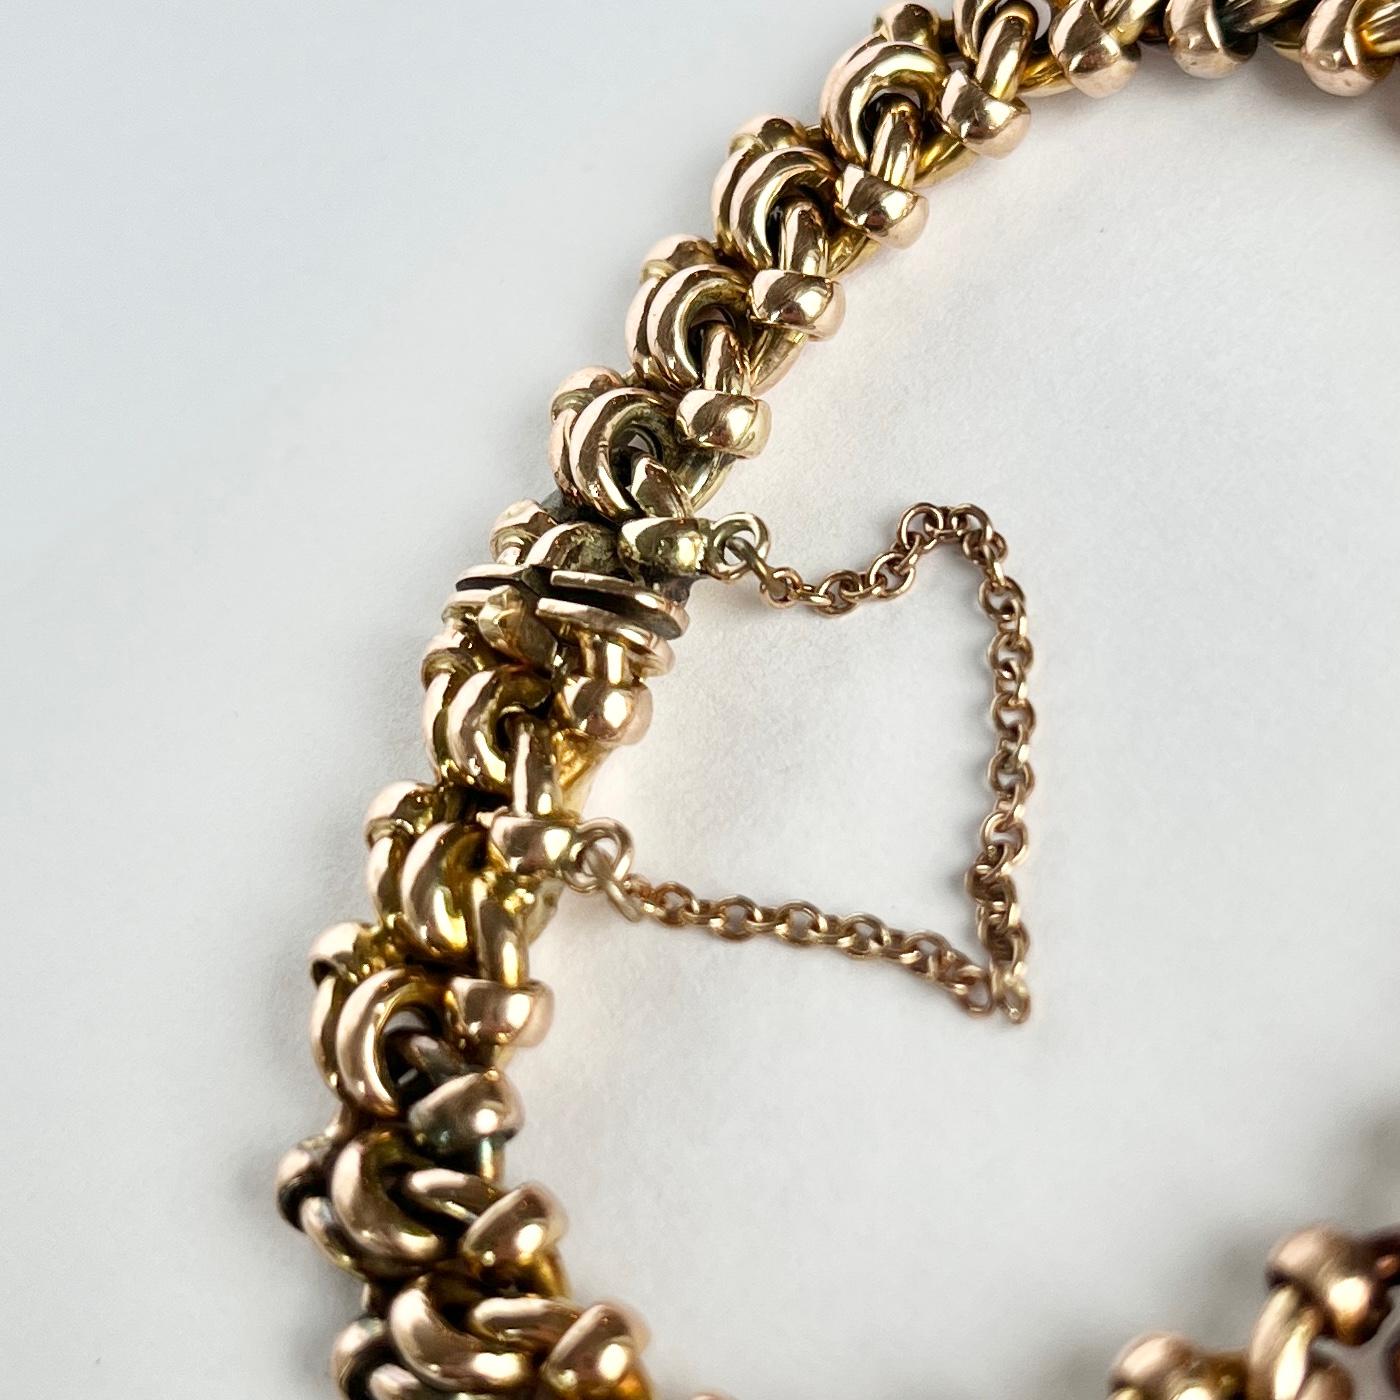 Antique 9 Carat Yellow Gold Bracelet Chain In Good Condition For Sale In Chipping Campden, GB